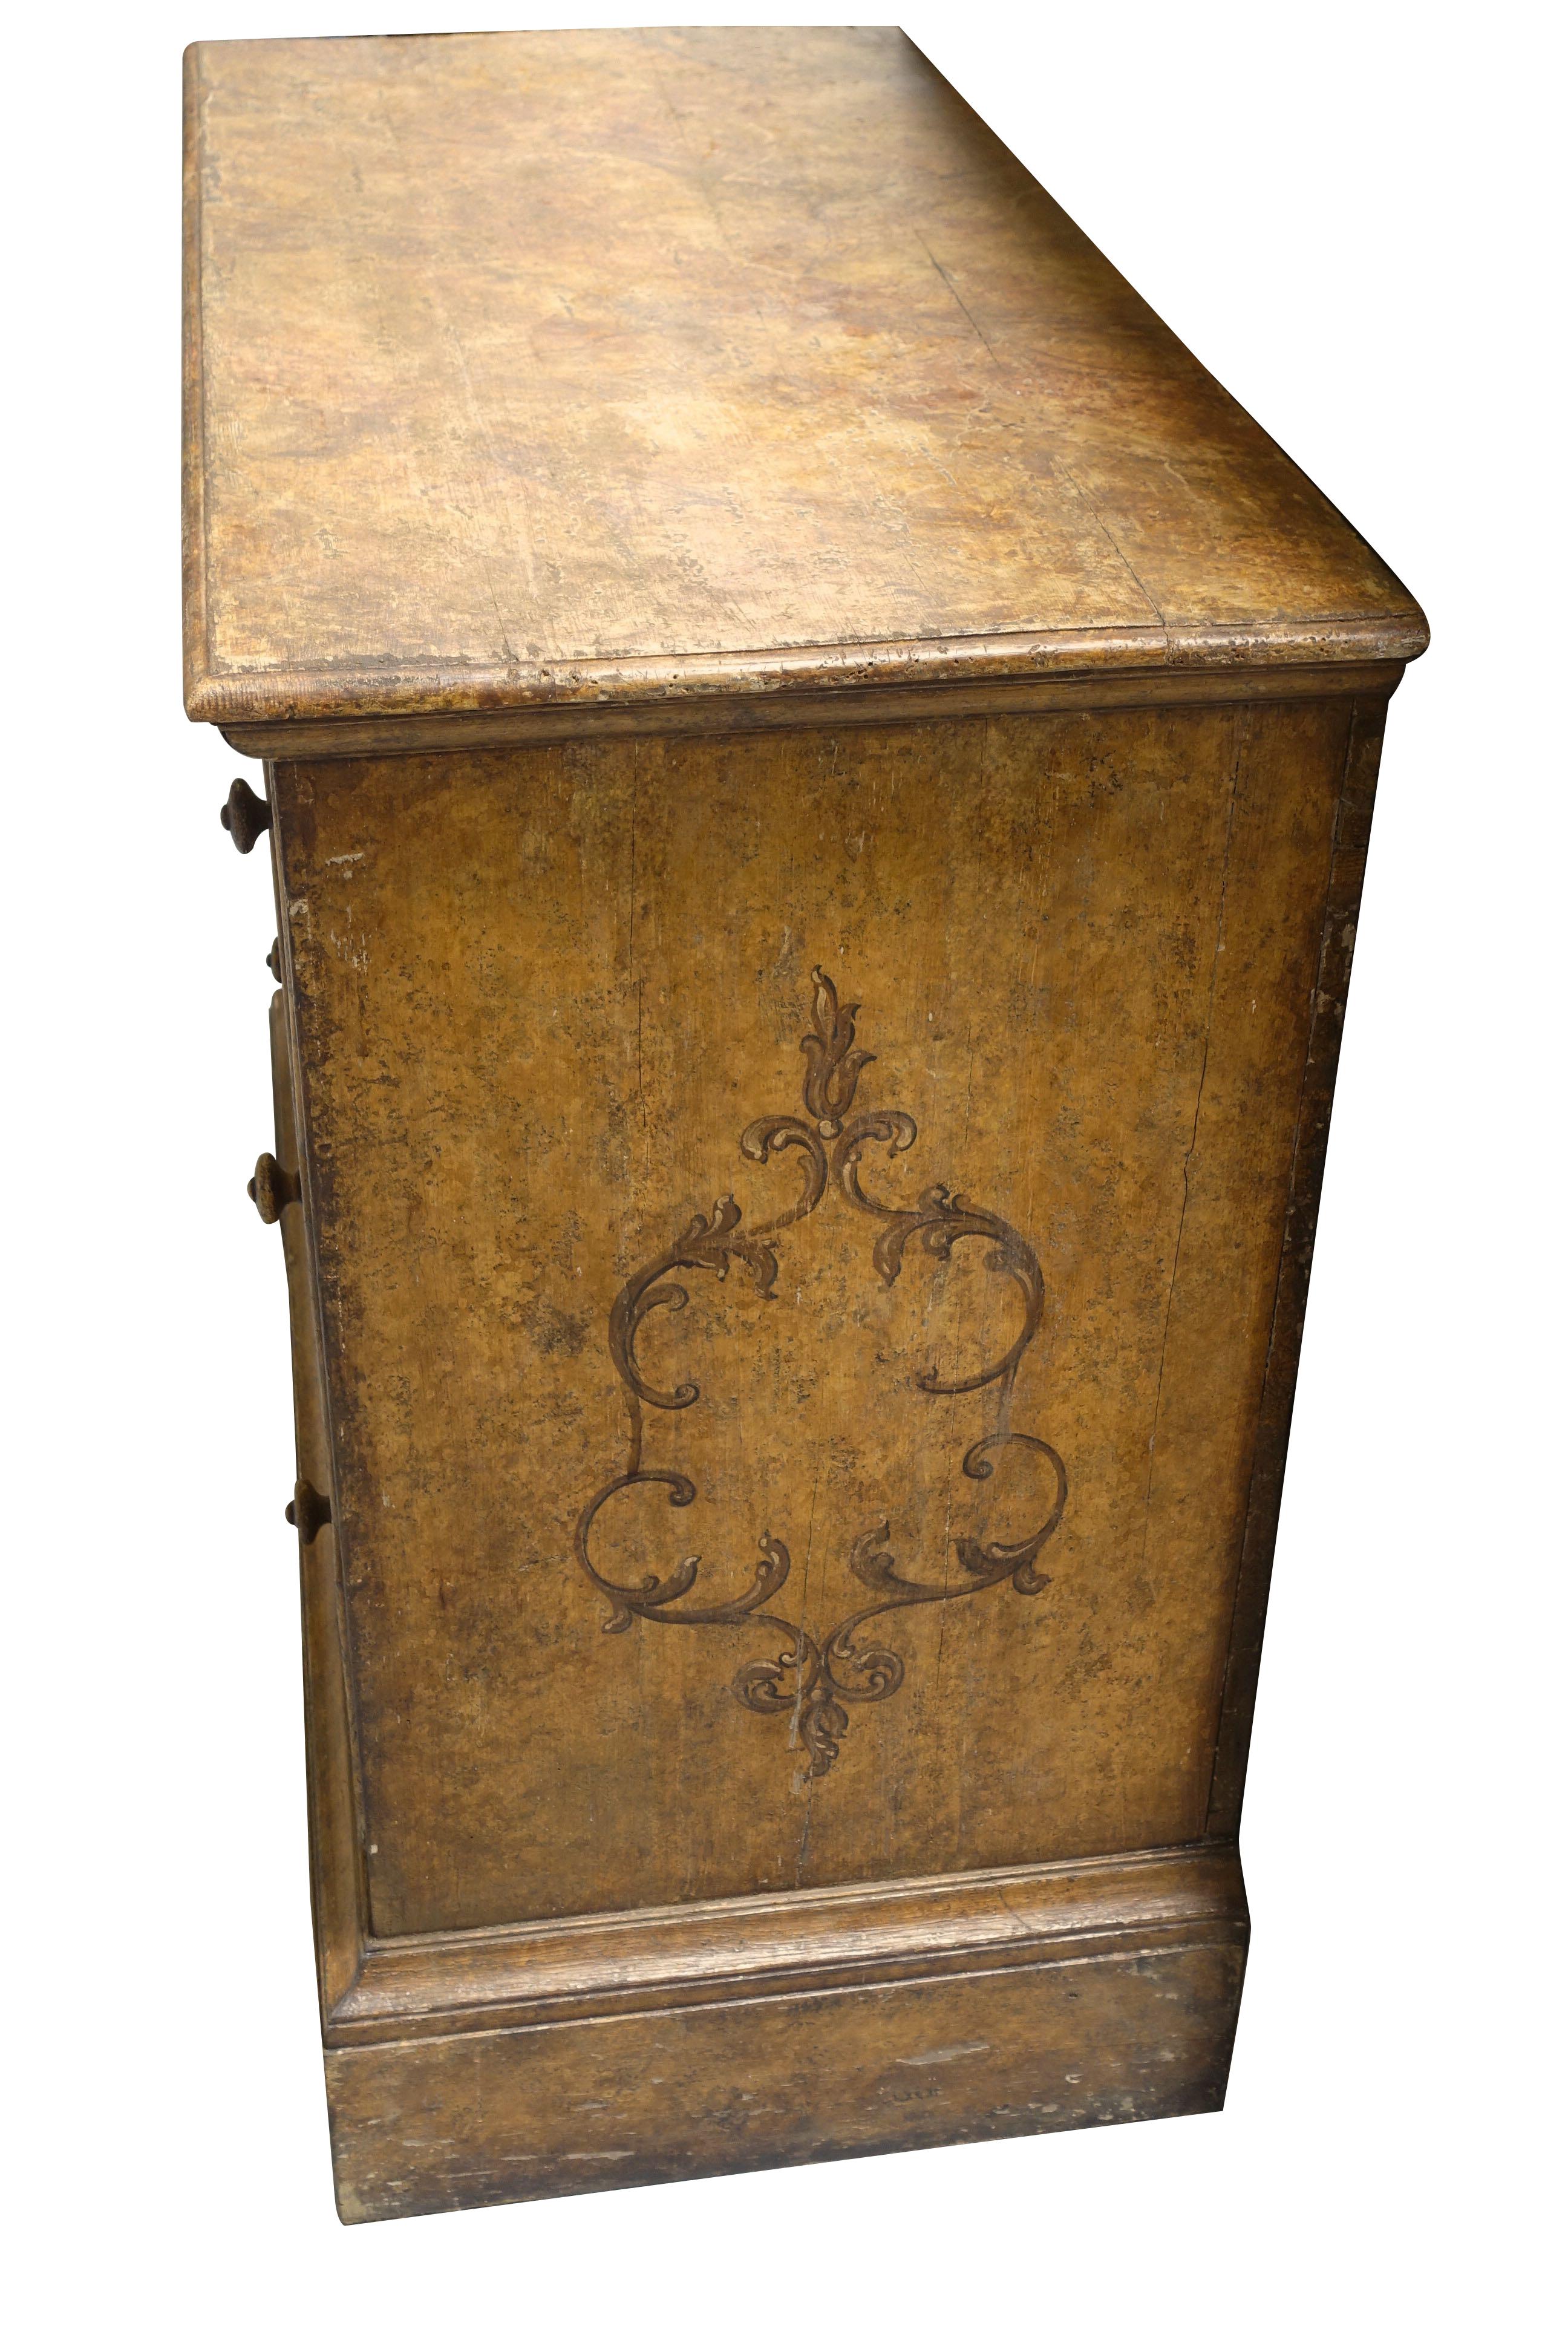 18th century Italian original faux painted three-drawer commode.
Decorative design details painted on sides and front drawers.
 